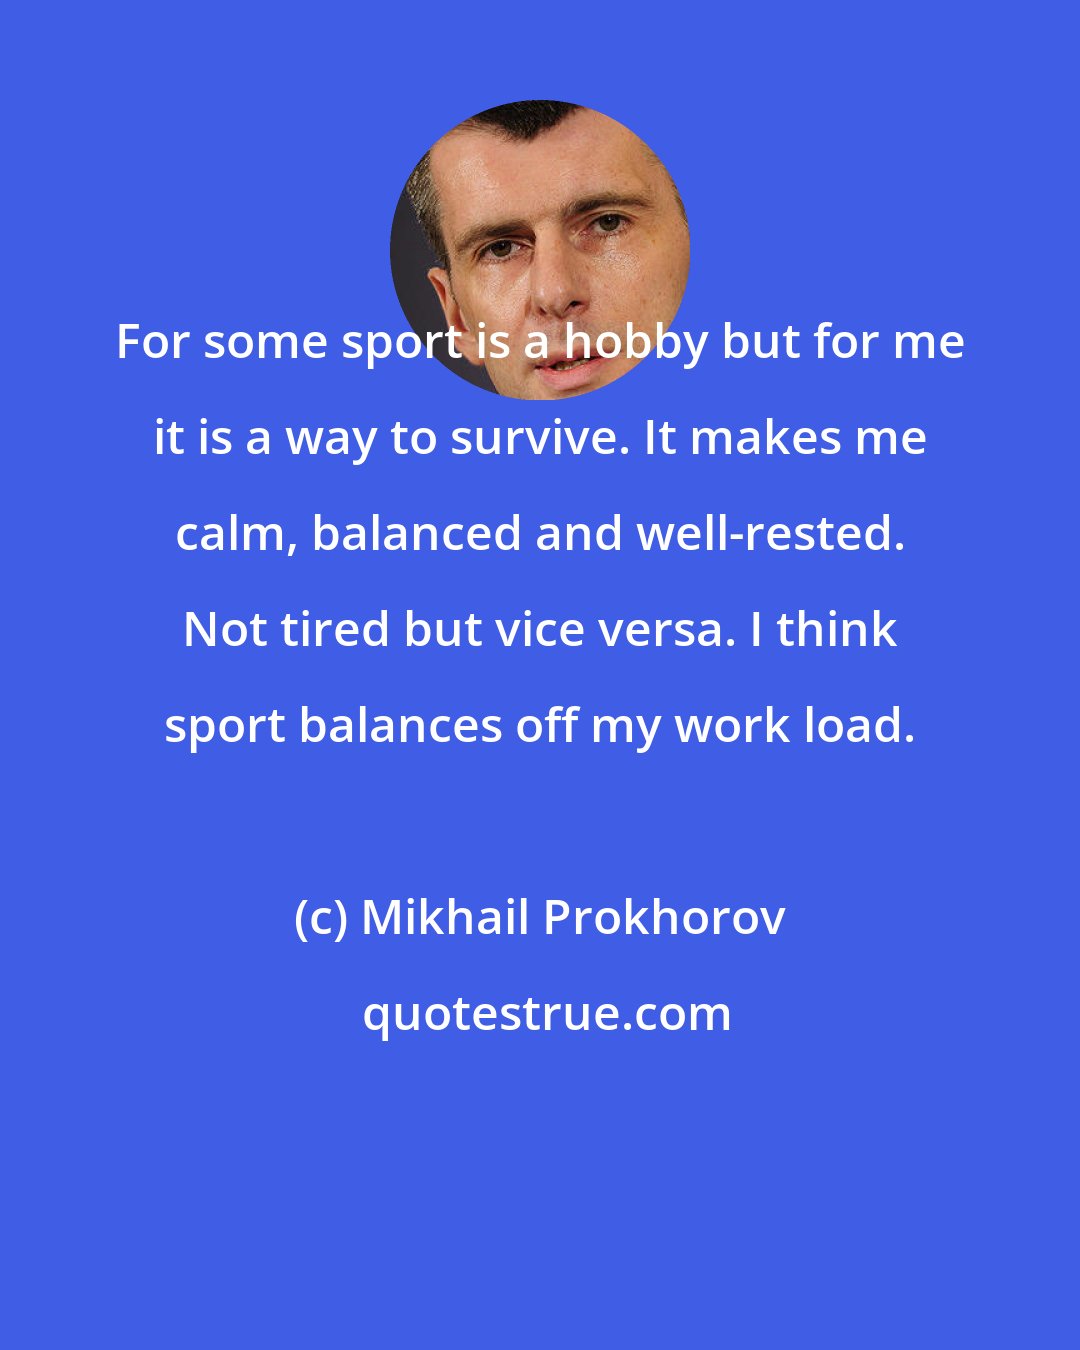 Mikhail Prokhorov: For some sport is a hobby but for me it is a way to survive. It makes me calm, balanced and well-rested. Not tired but vice versa. I think sport balances off my work load.